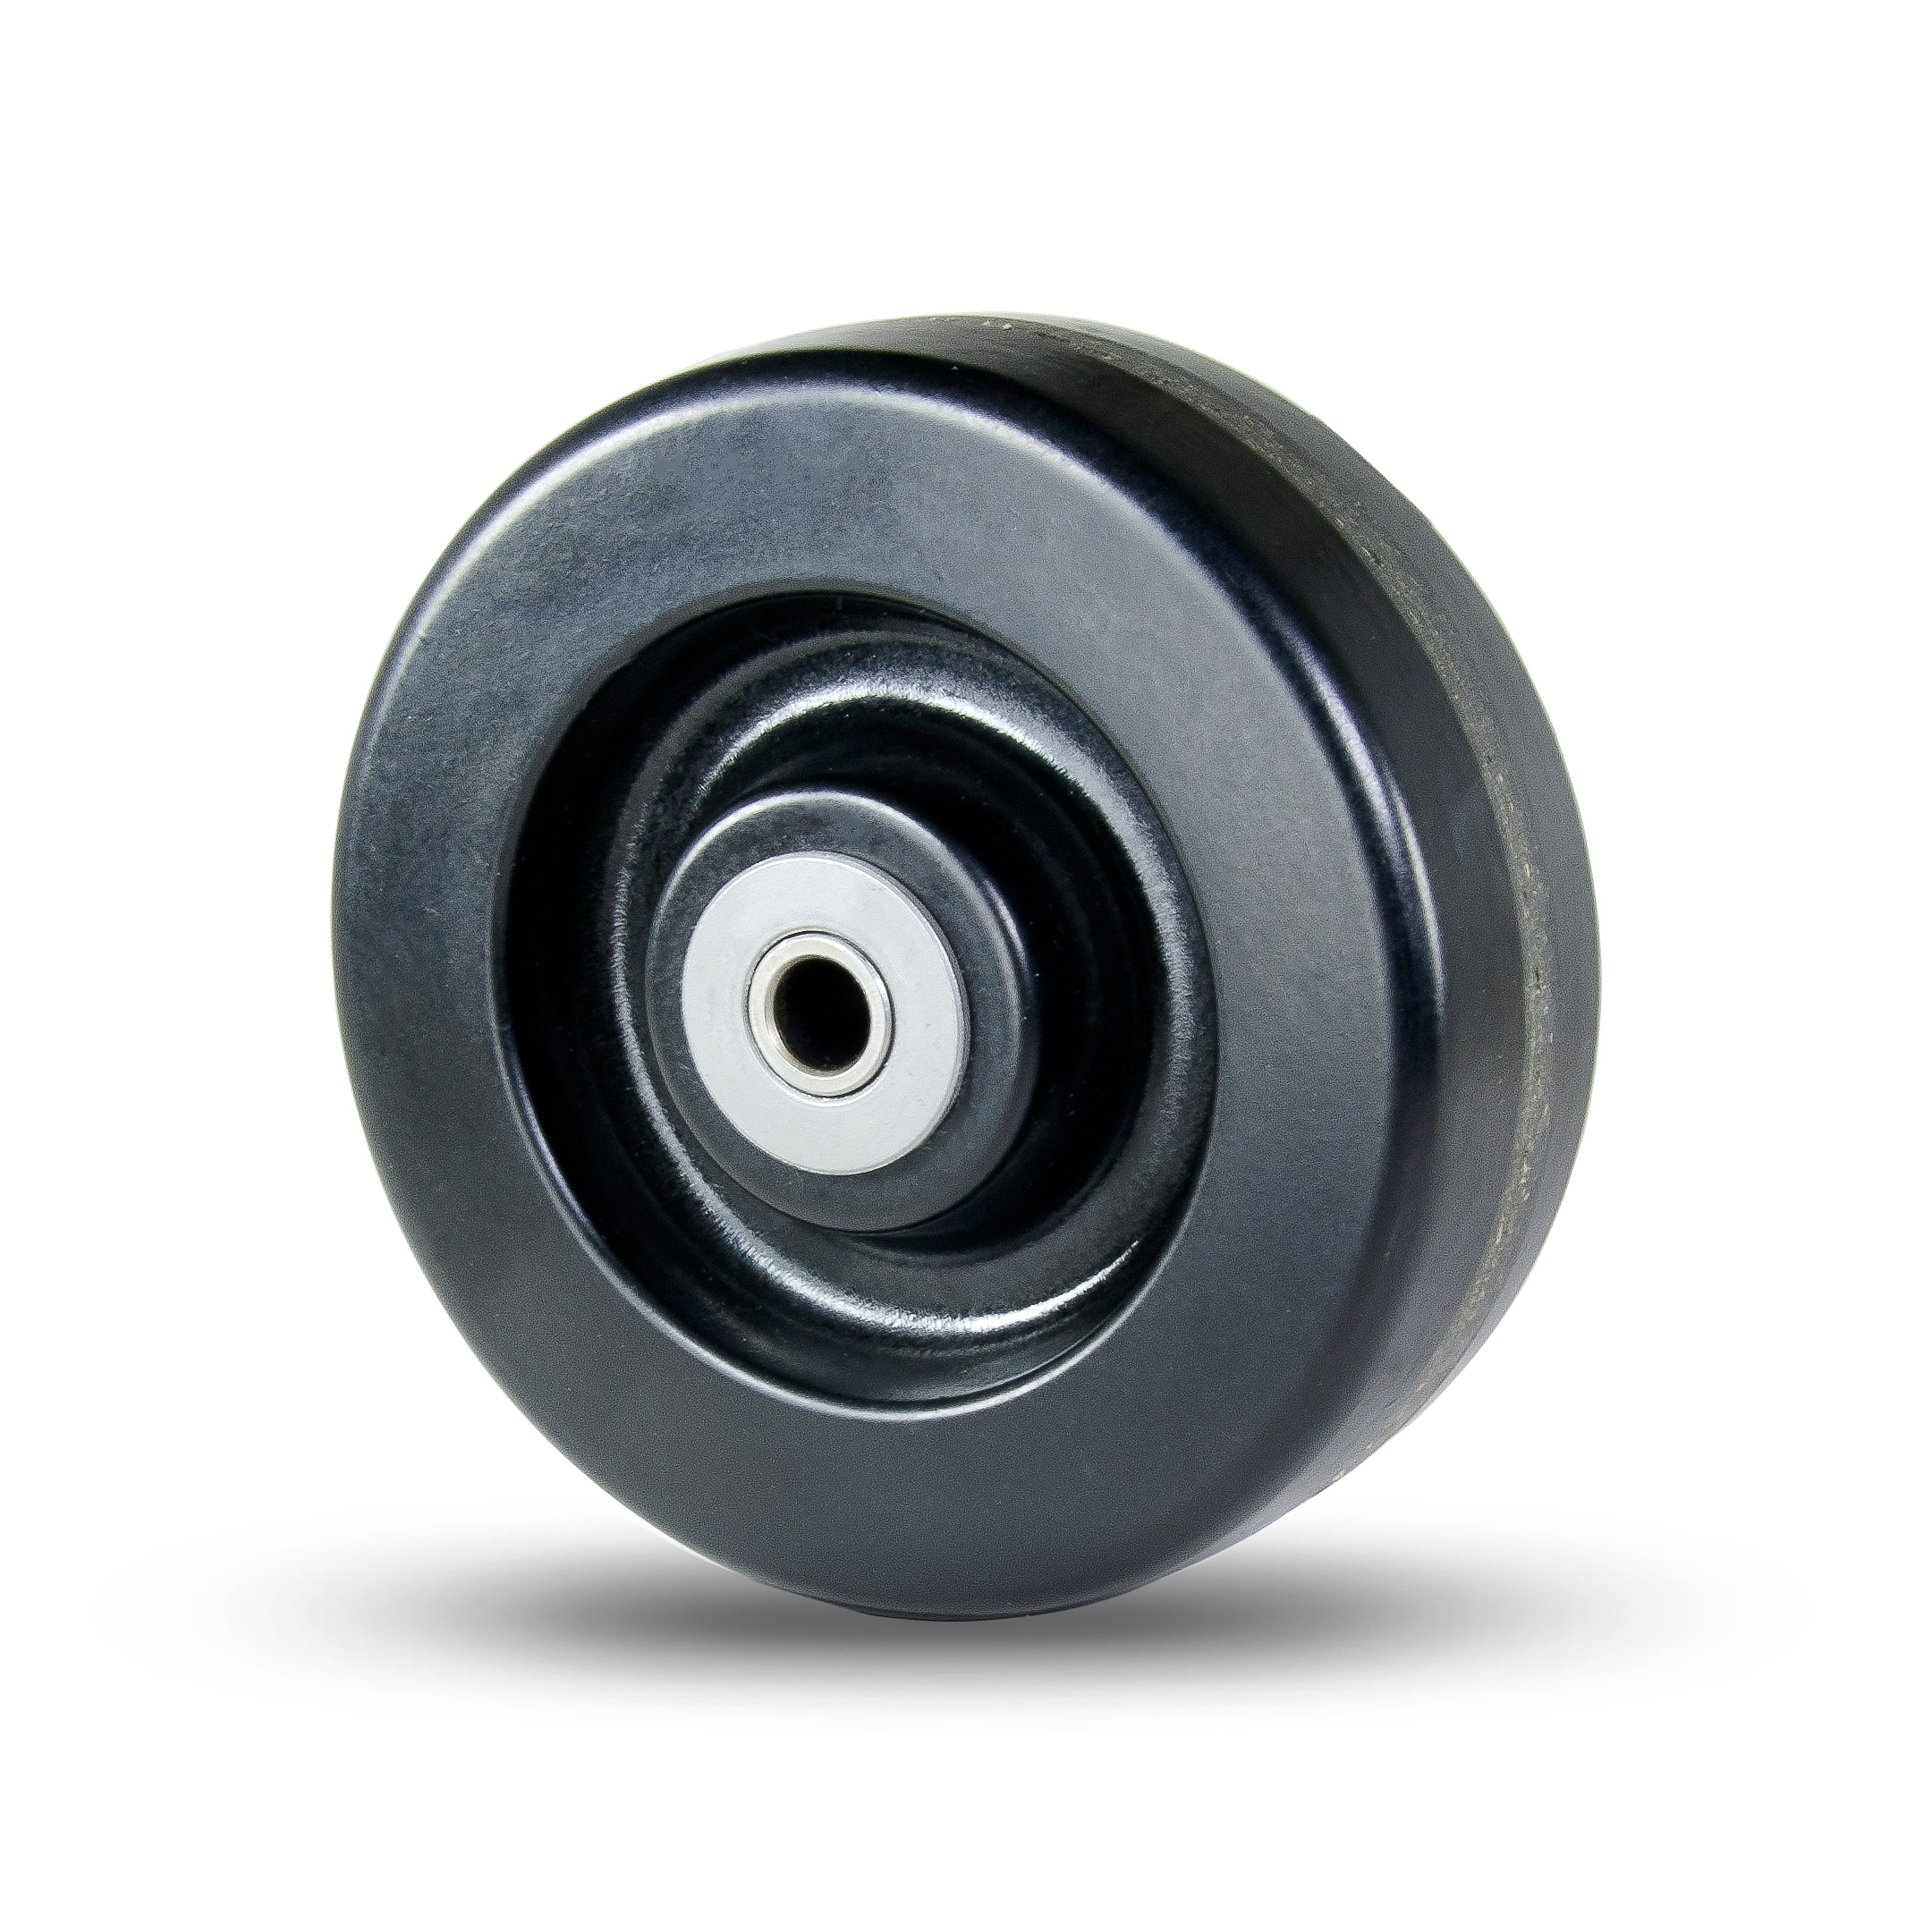 Darnell-Rose 80 Series Casters